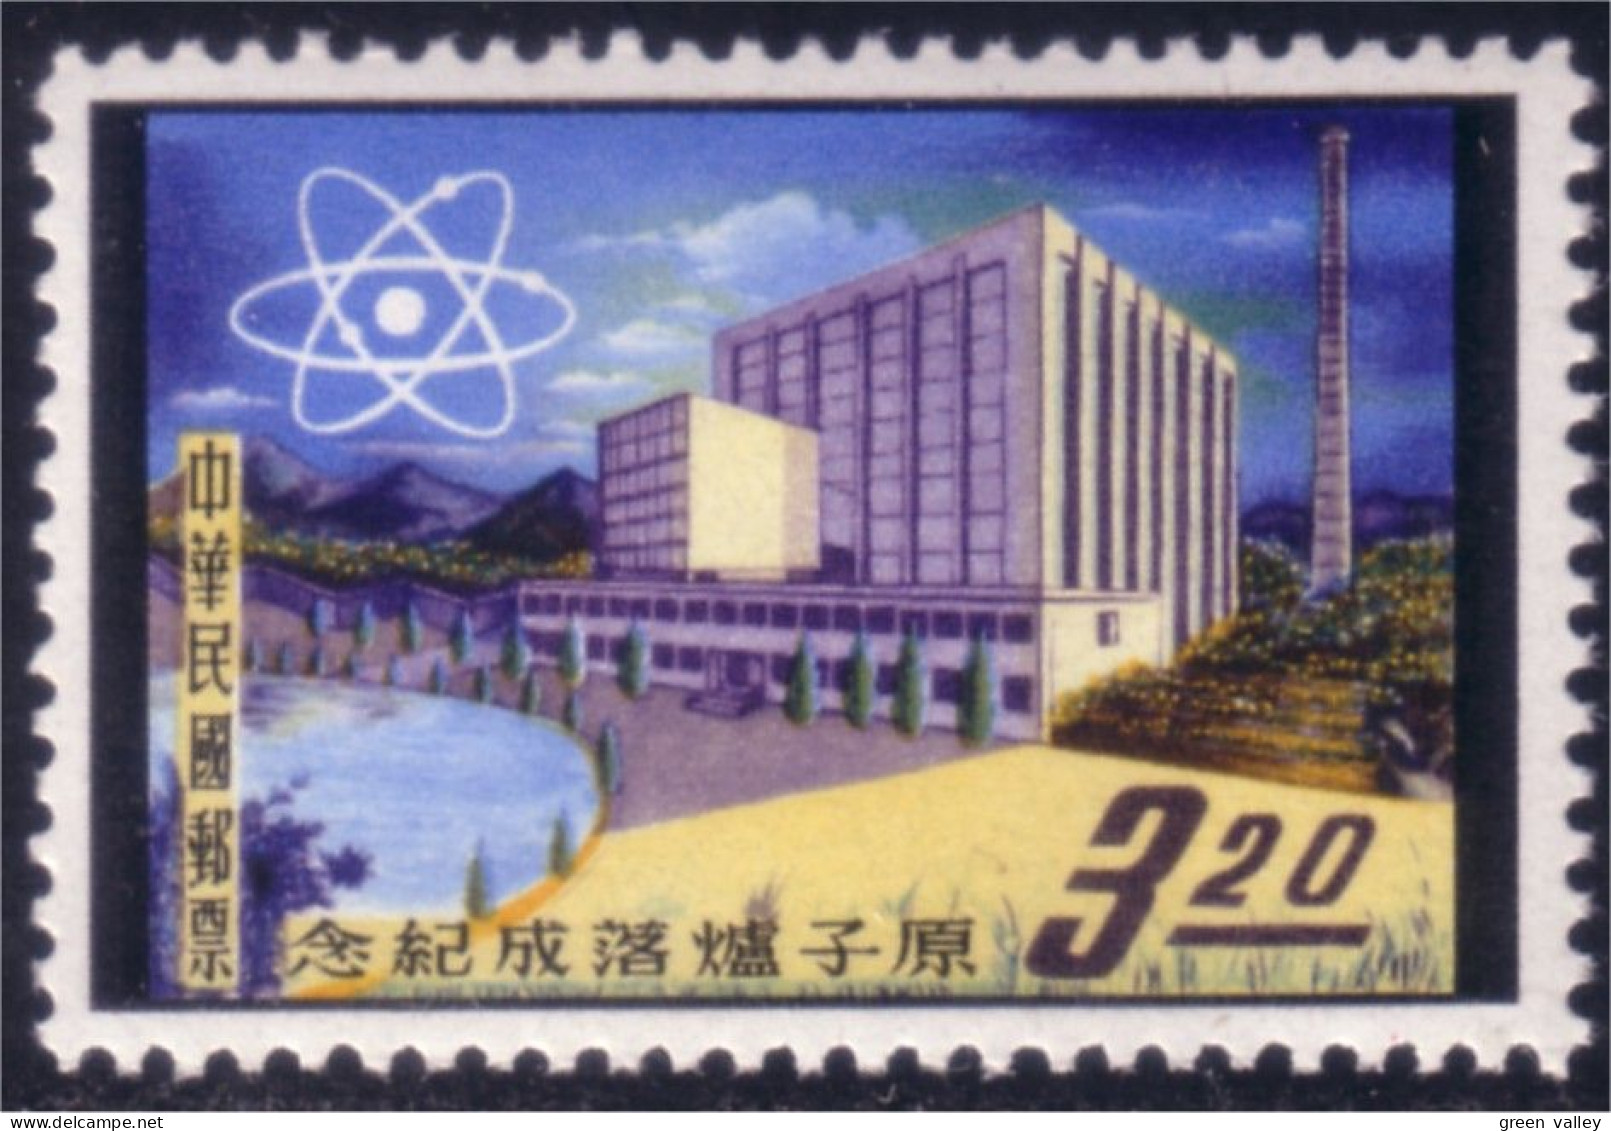 260 China Atome Nuclear Laboratory Nucléaire MNH ** Neuf SC (CHI-146) - Atom